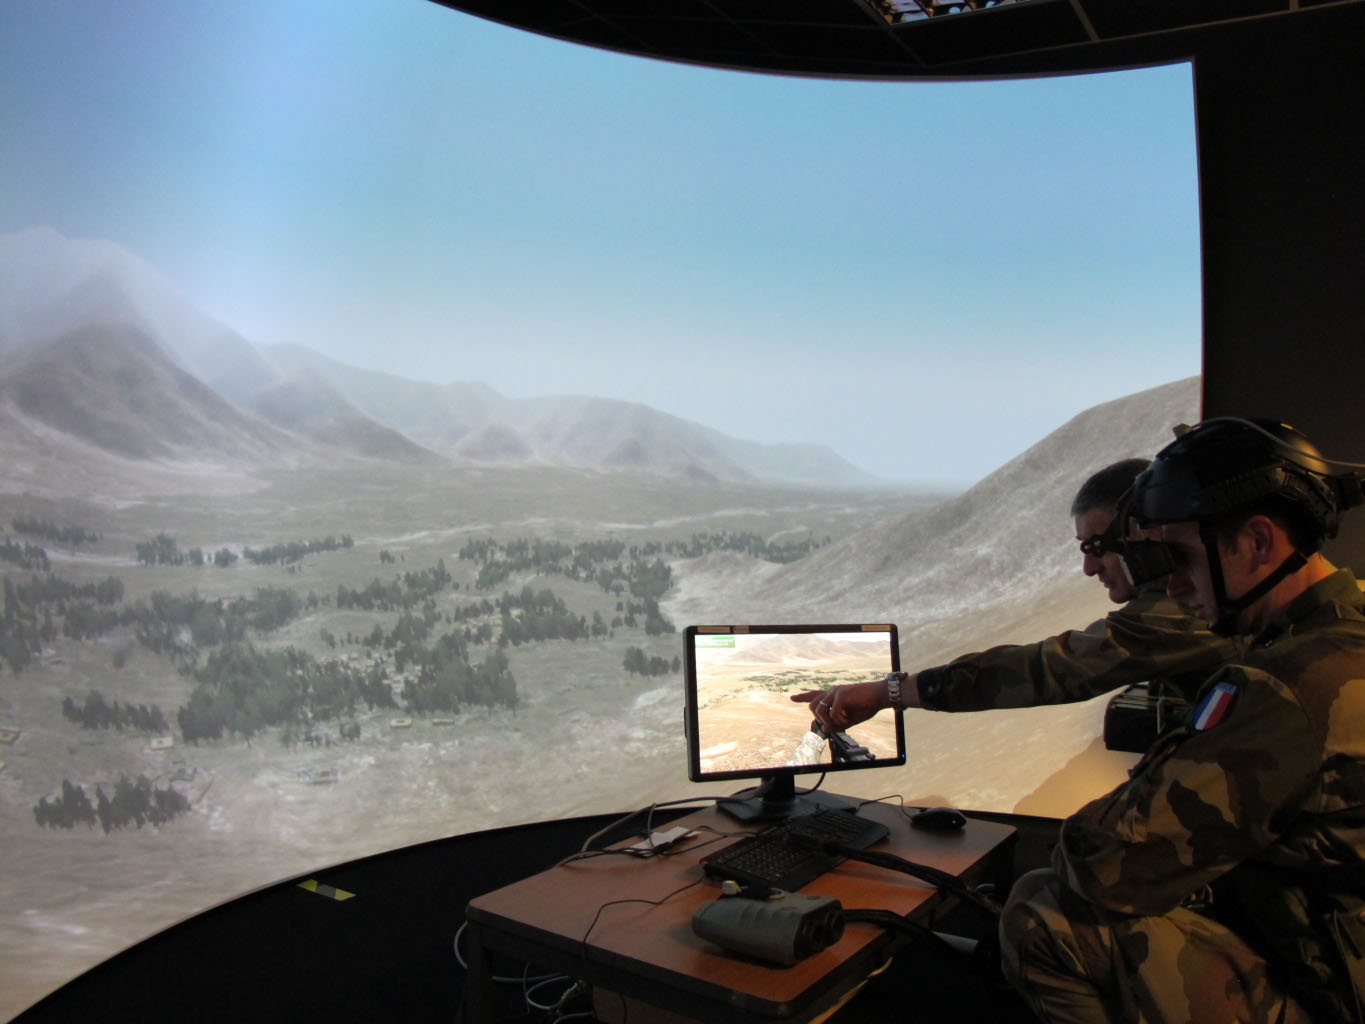 FAC French Air Force Forward Air Controller JTAC military simulation training dome display systems projection systems